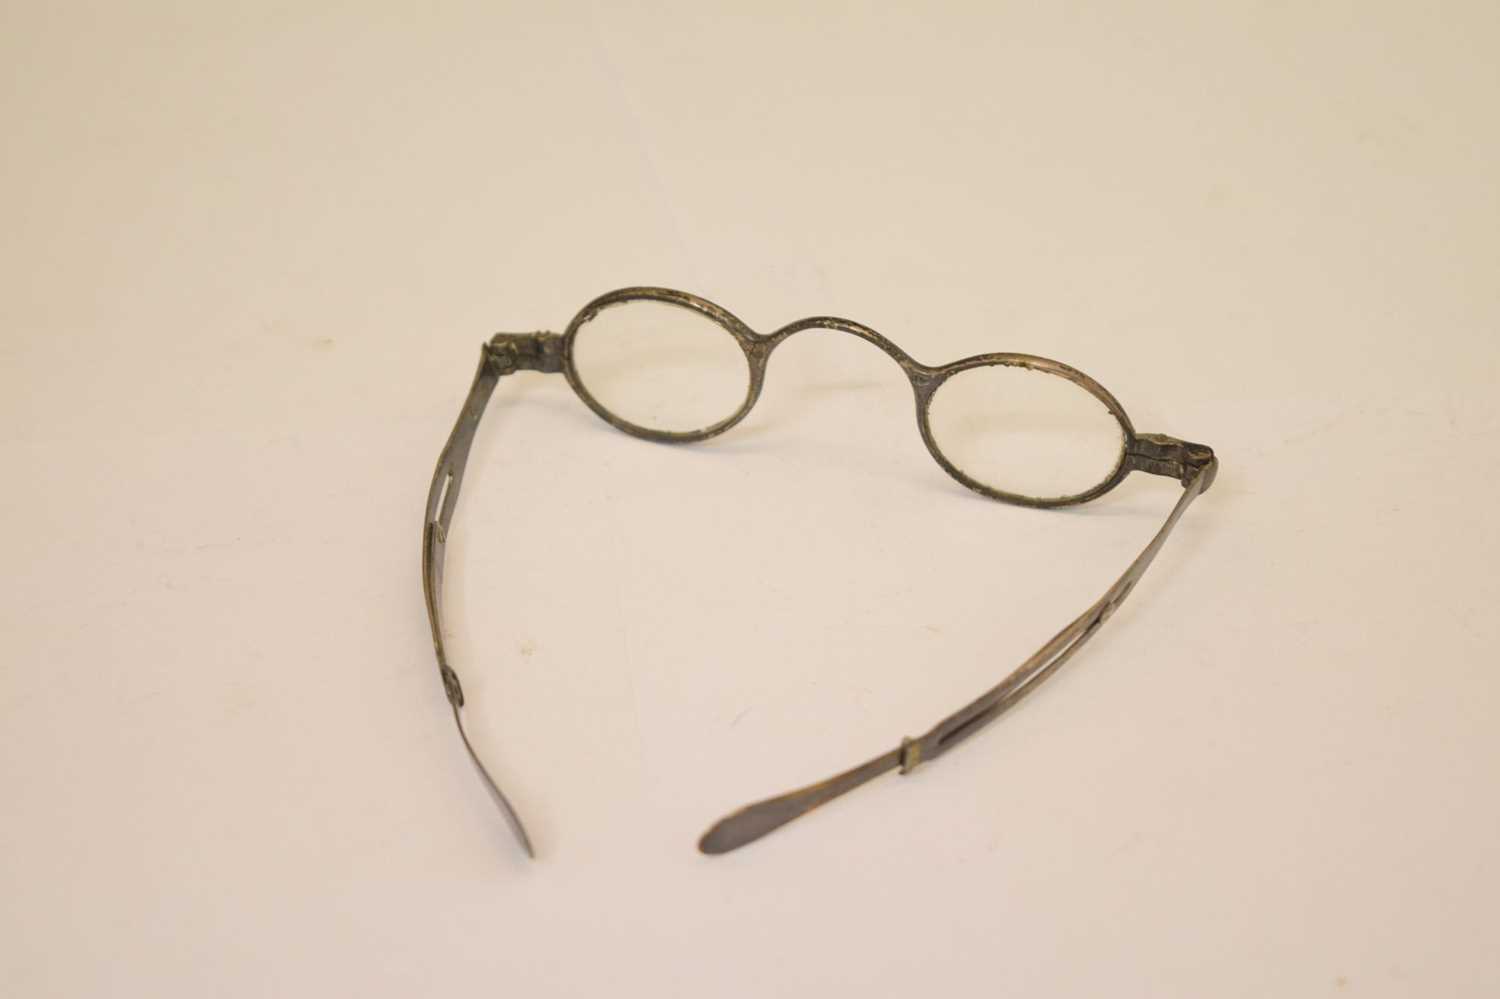 Pair of George III silver-mounted spectacles - Image 3 of 8